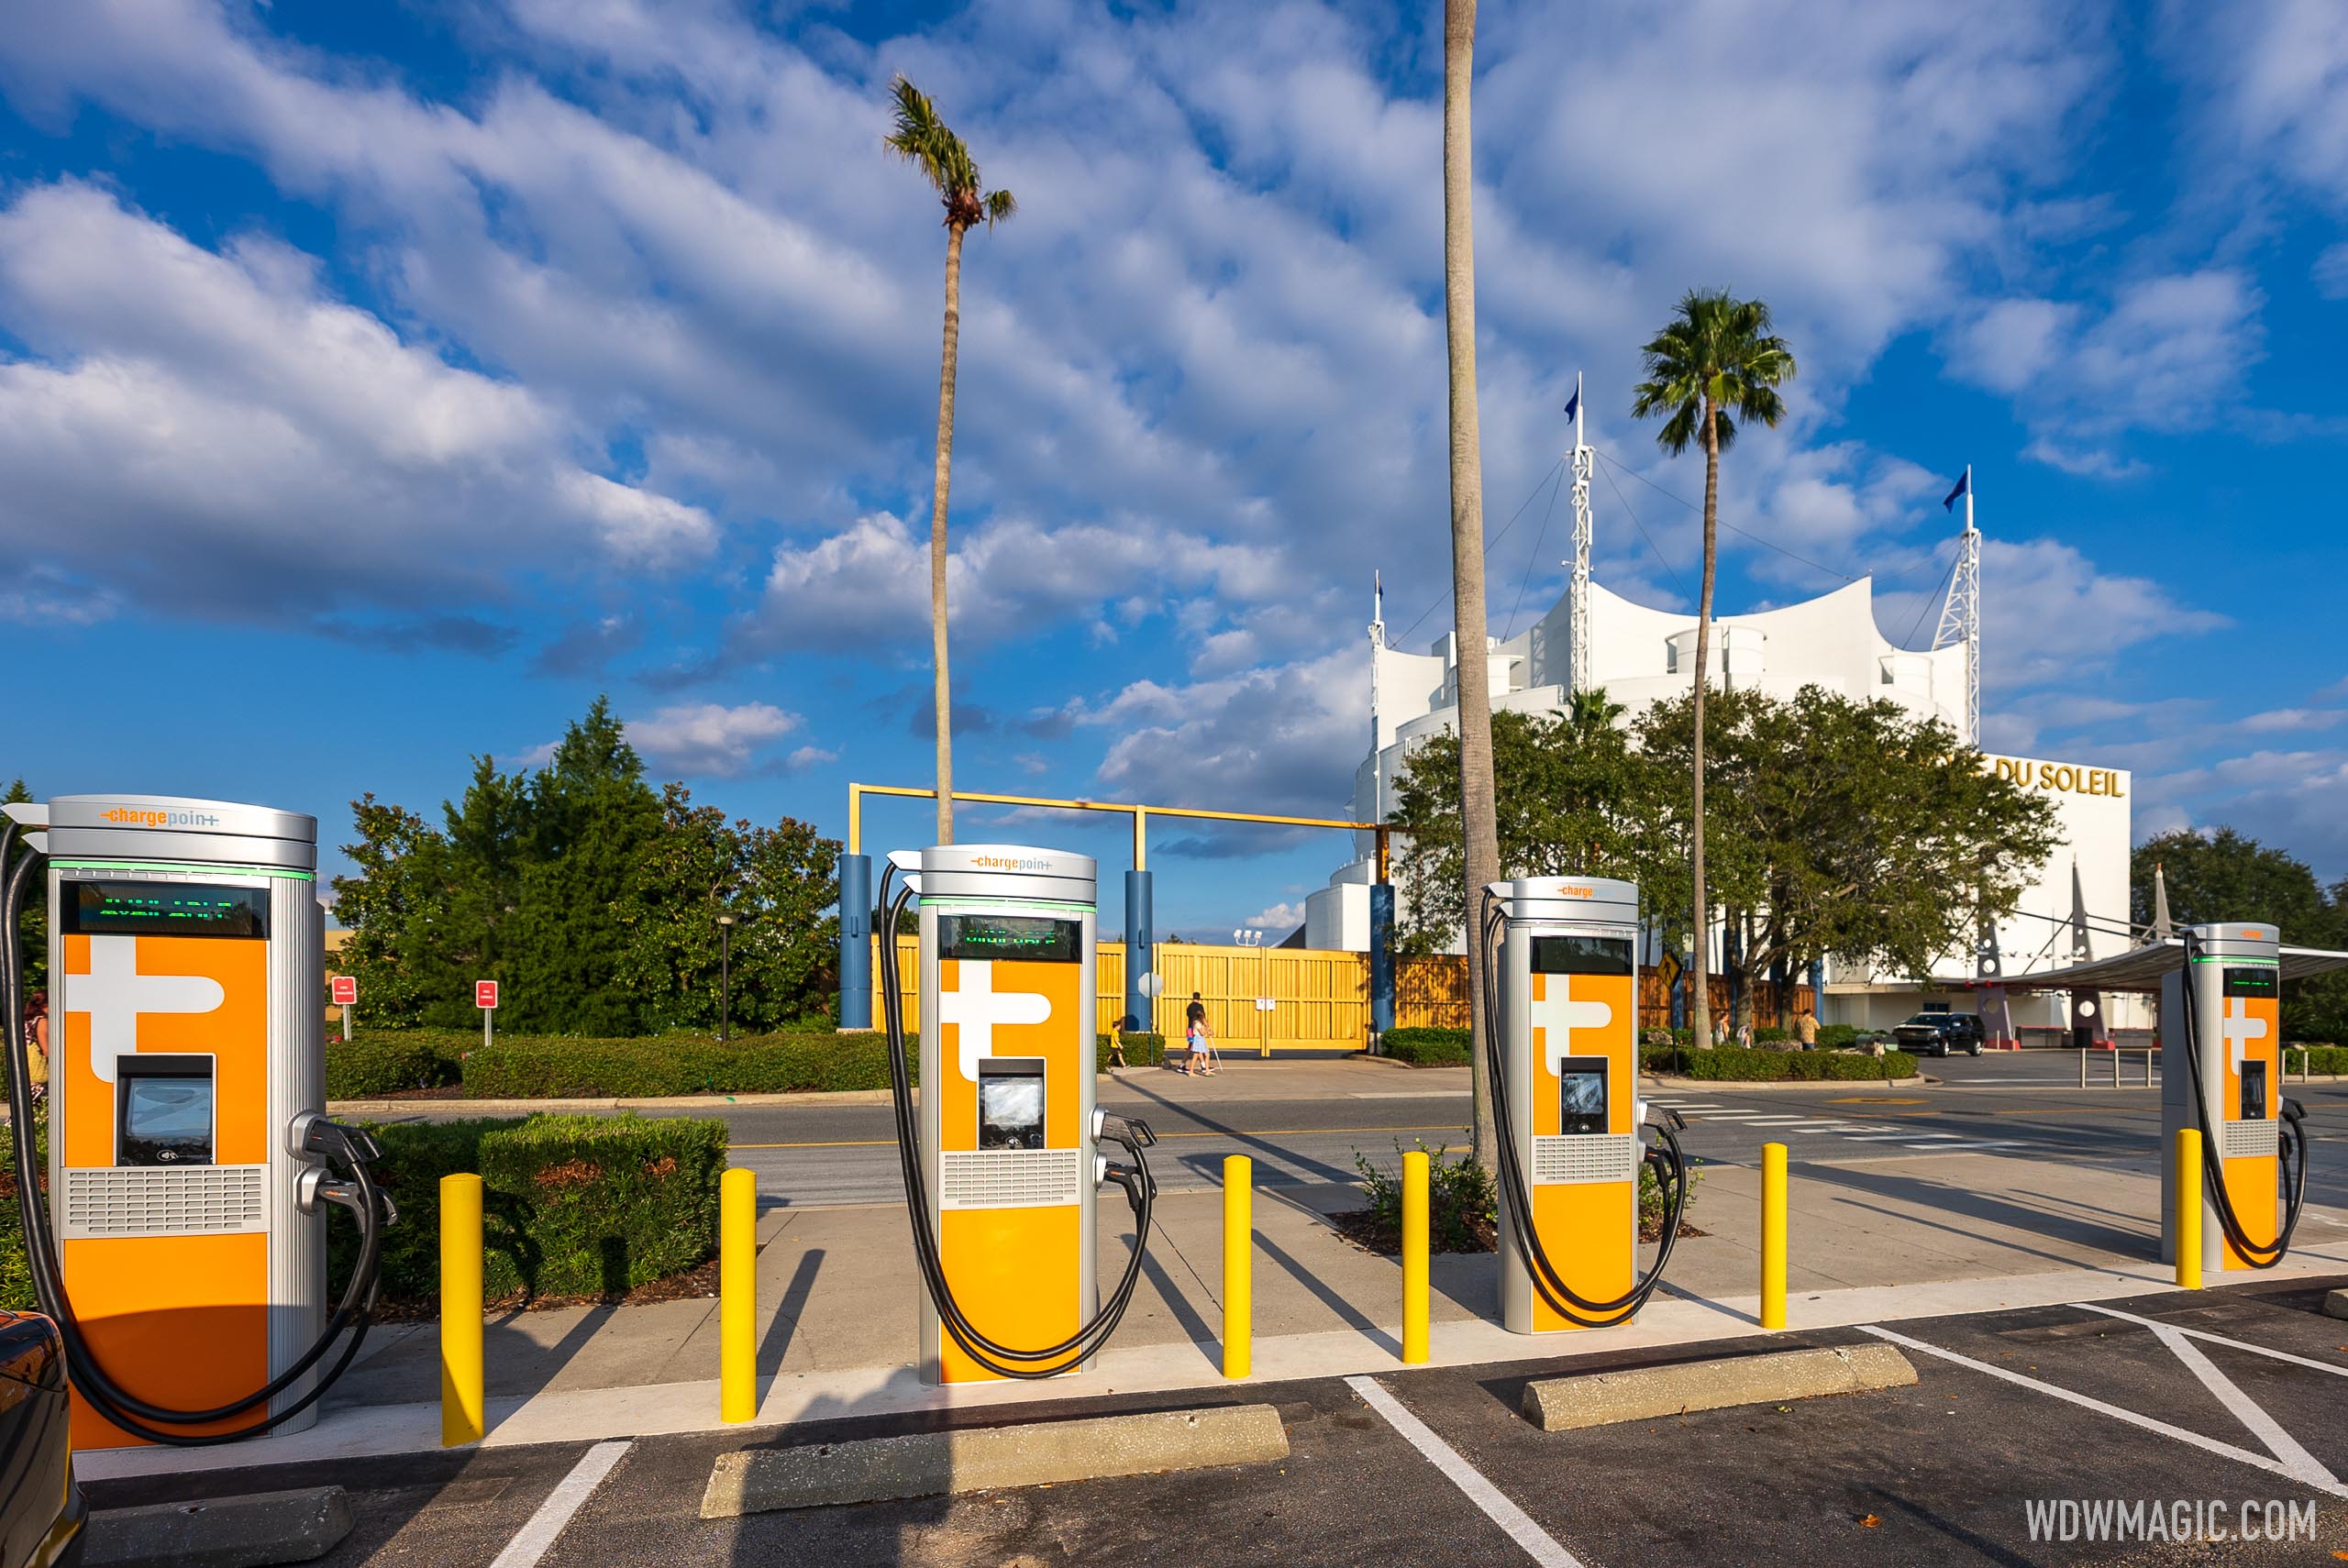 Level 3 DC fast charging for Electric Vehicles arrives at Walt Disney